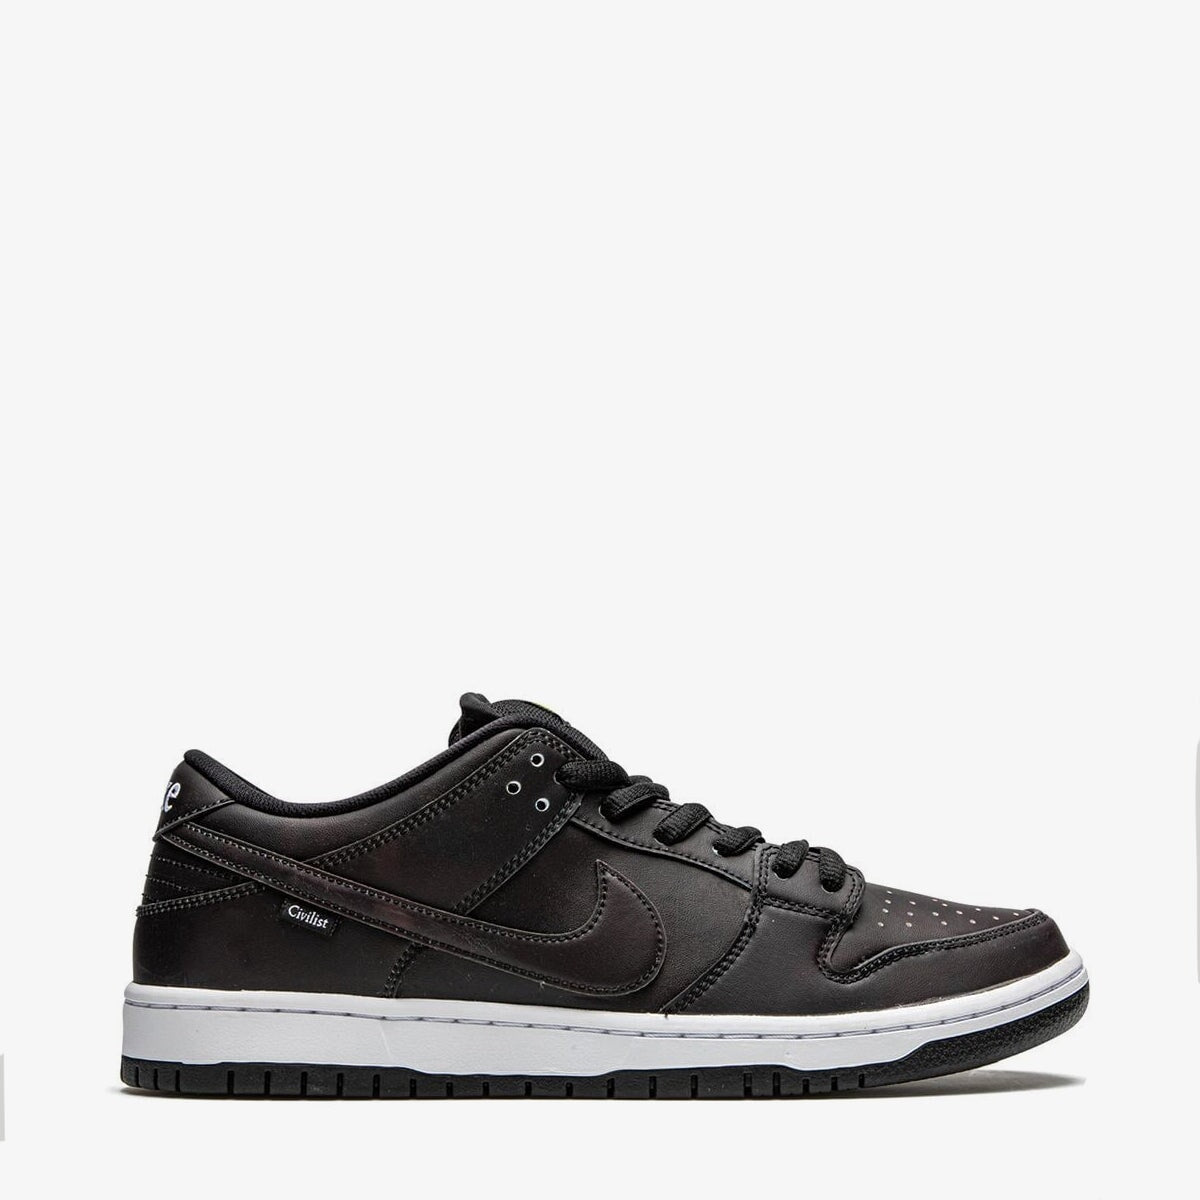 Civilist x Nike SB Dunk Low Pro QS “Thermography” – Plug and Play